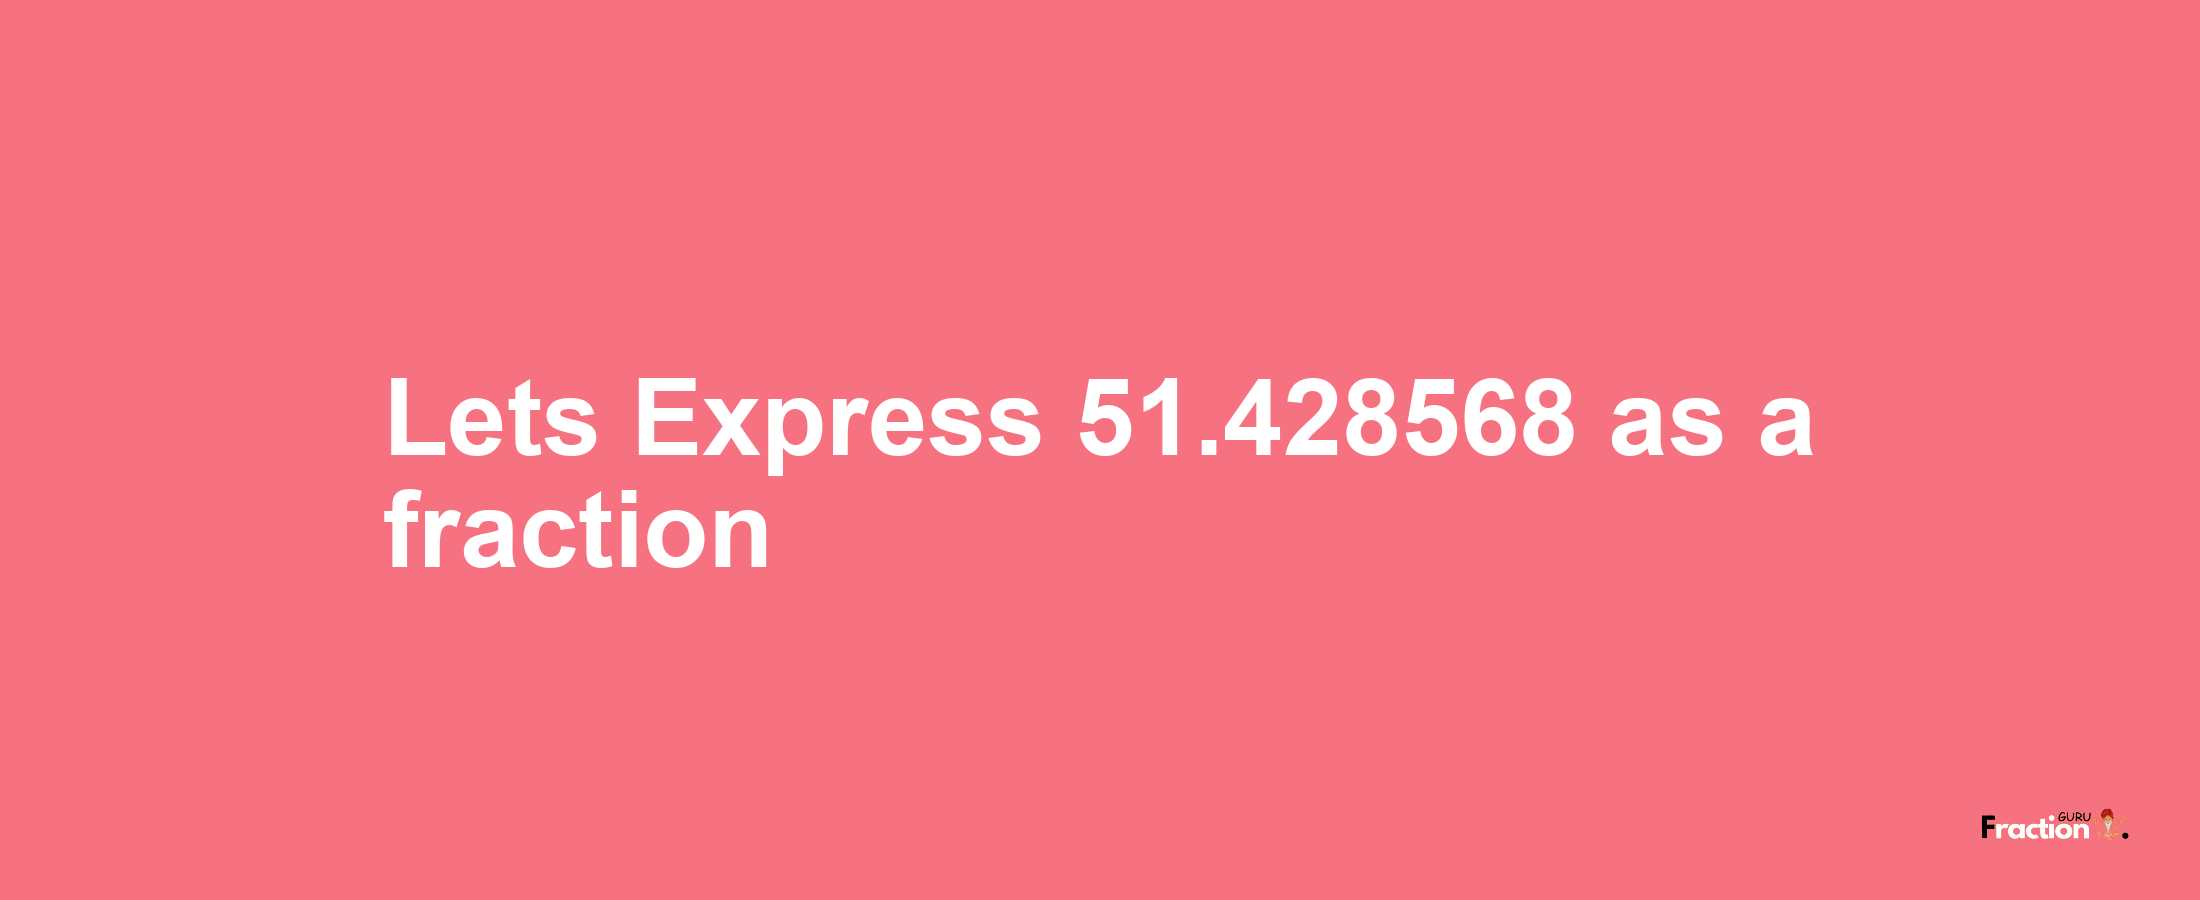 Lets Express 51.428568 as afraction